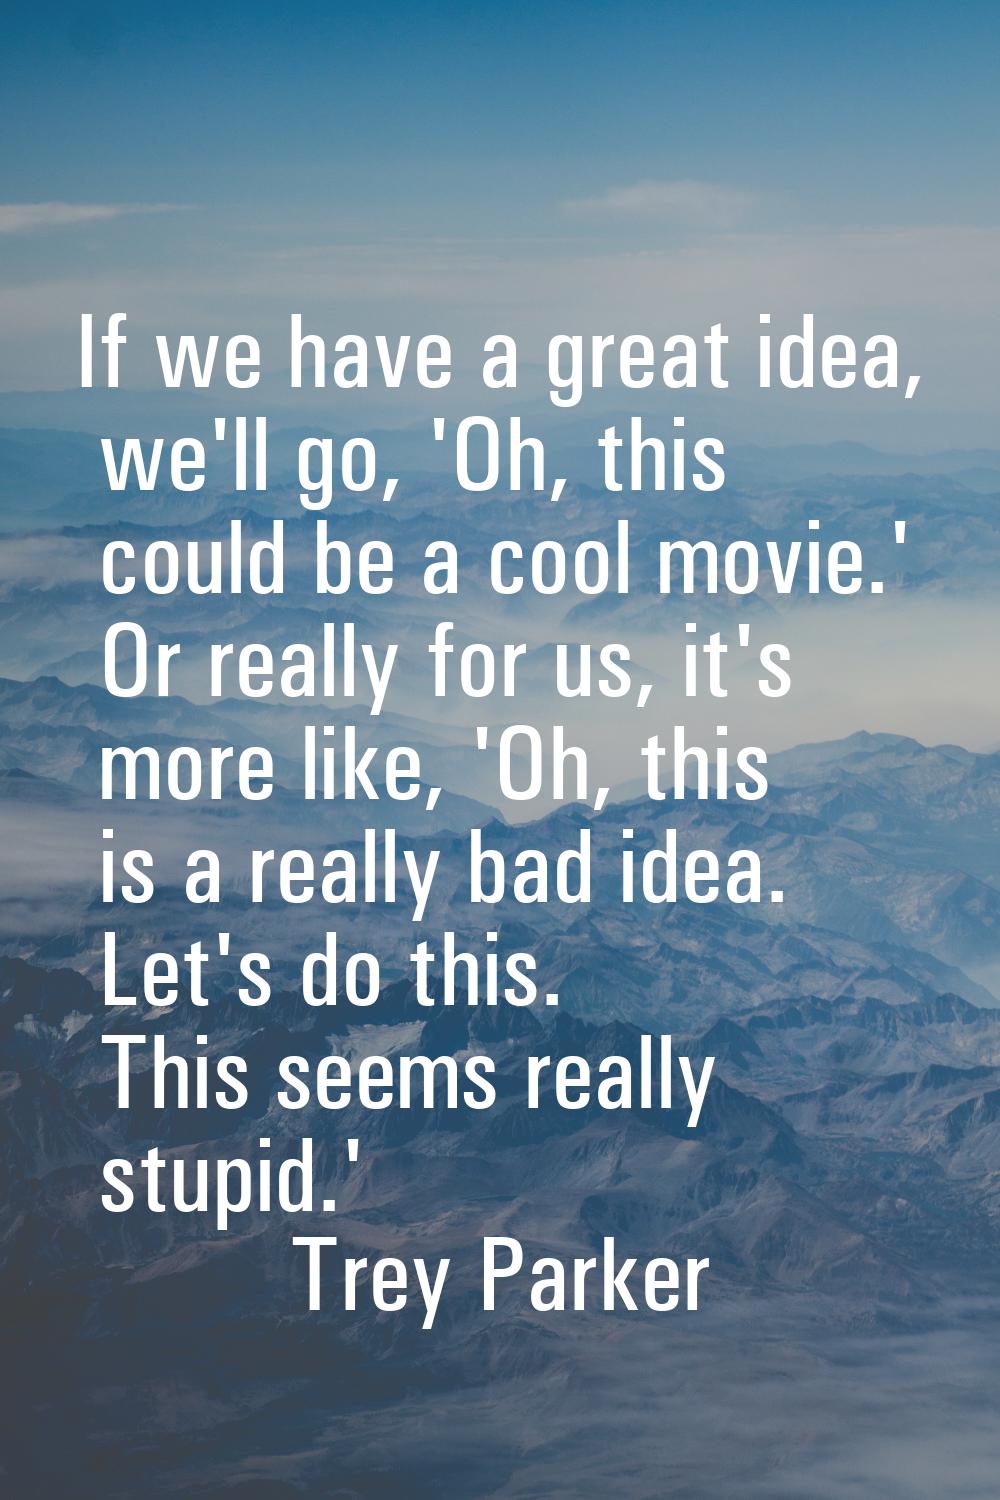 If we have a great idea, we'll go, 'Oh, this could be a cool movie.' Or really for us, it's more li